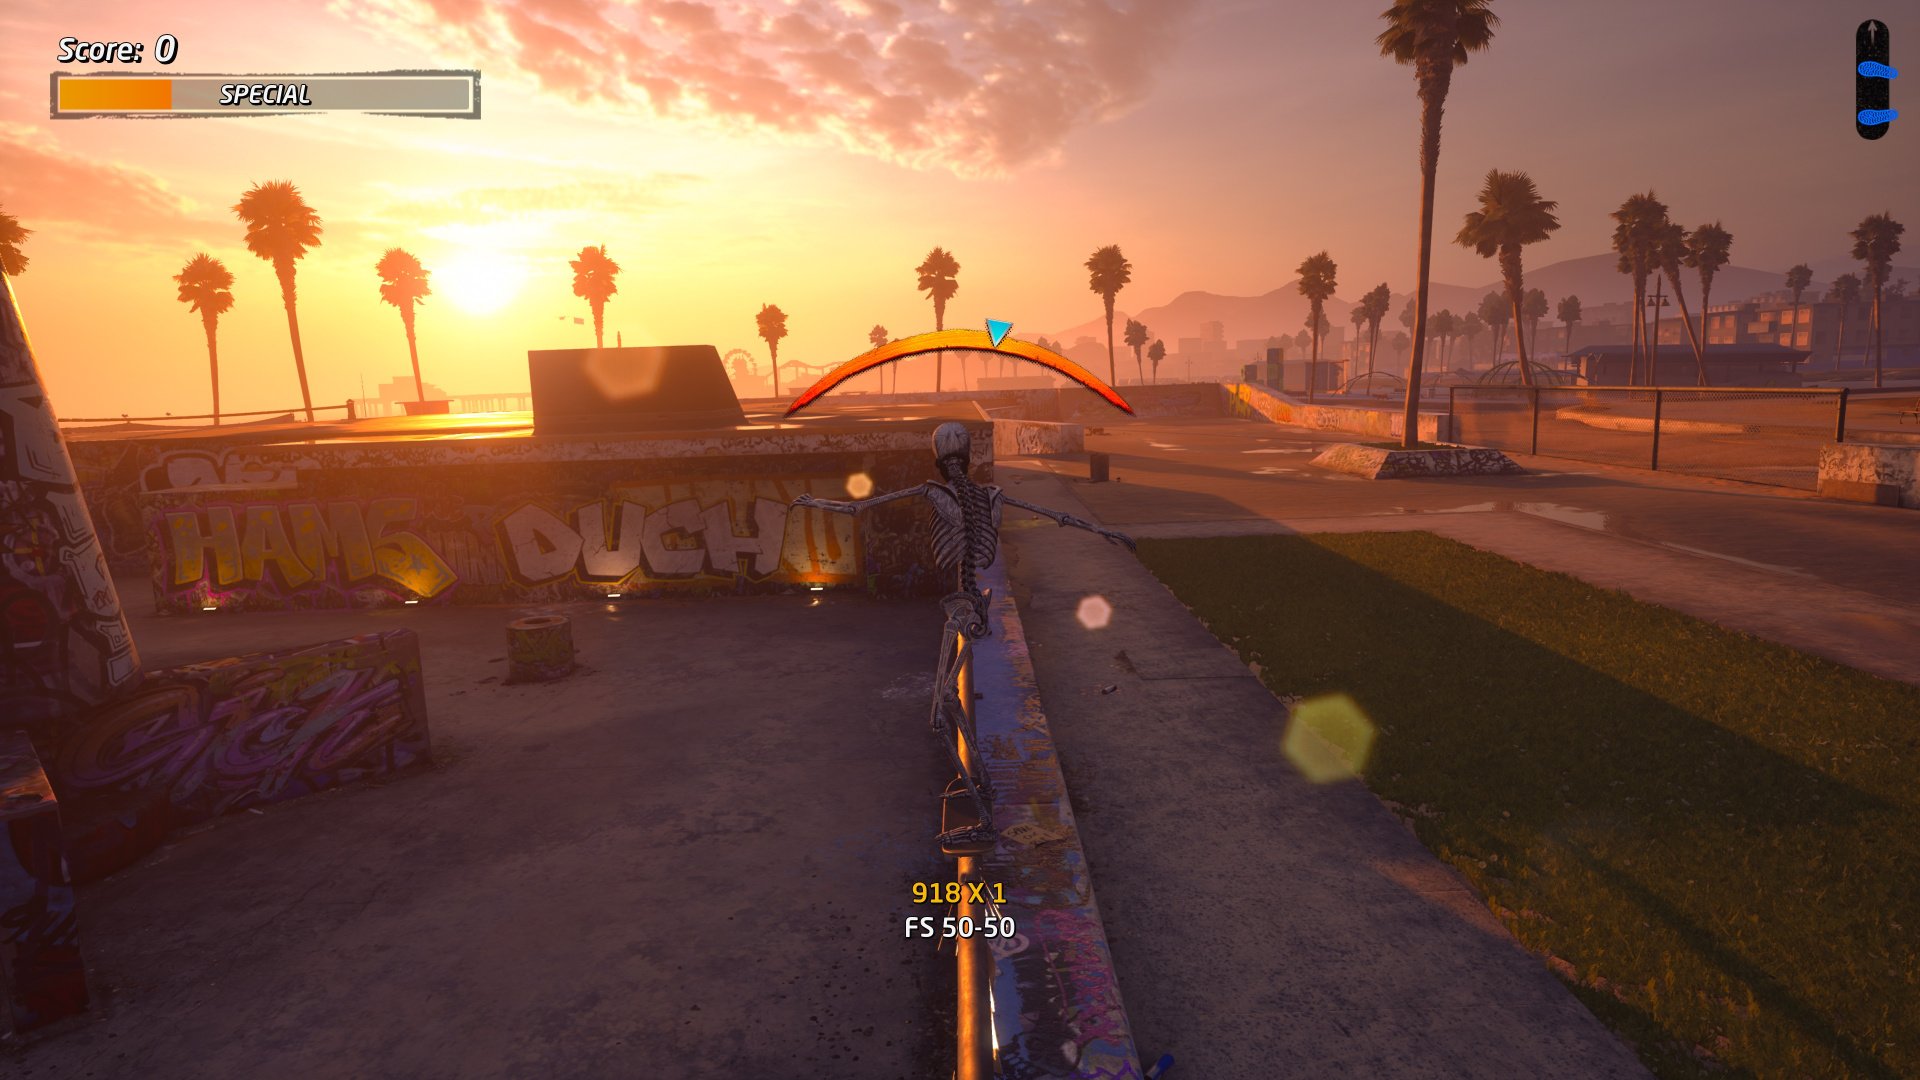 Tony Hawk's Pro Skater 1+2 Will Cost $10 To Upgrade To PS5 And Xbox Series  X/S Versions